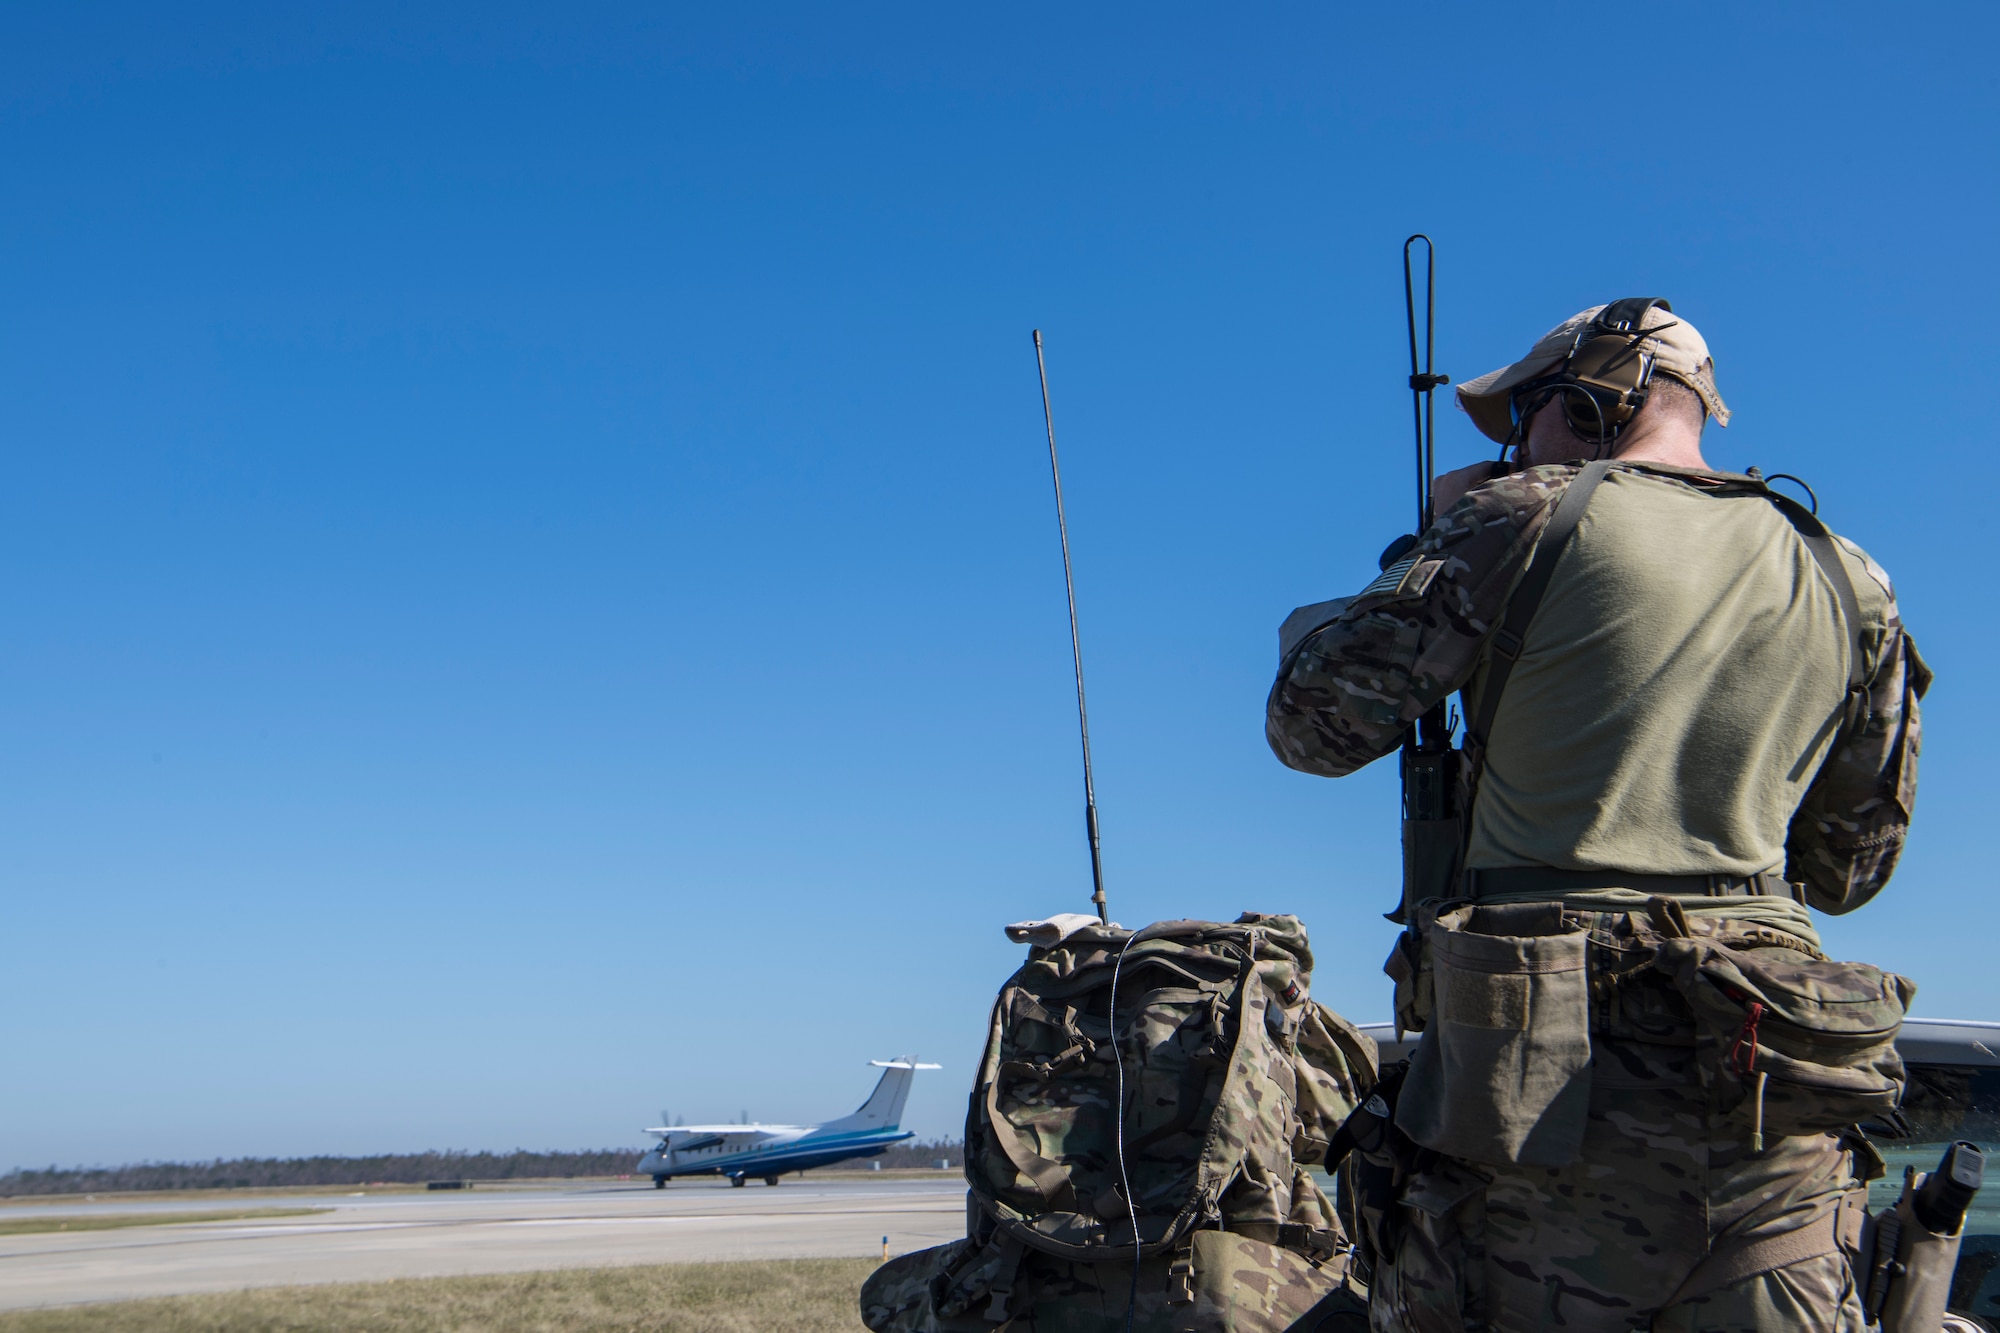 A Special Tactics Airman with the 23rd Special Tactics Squadron controls an aircraft at Tyndall Air Force Base, Florida, Oct. 14, 2018.